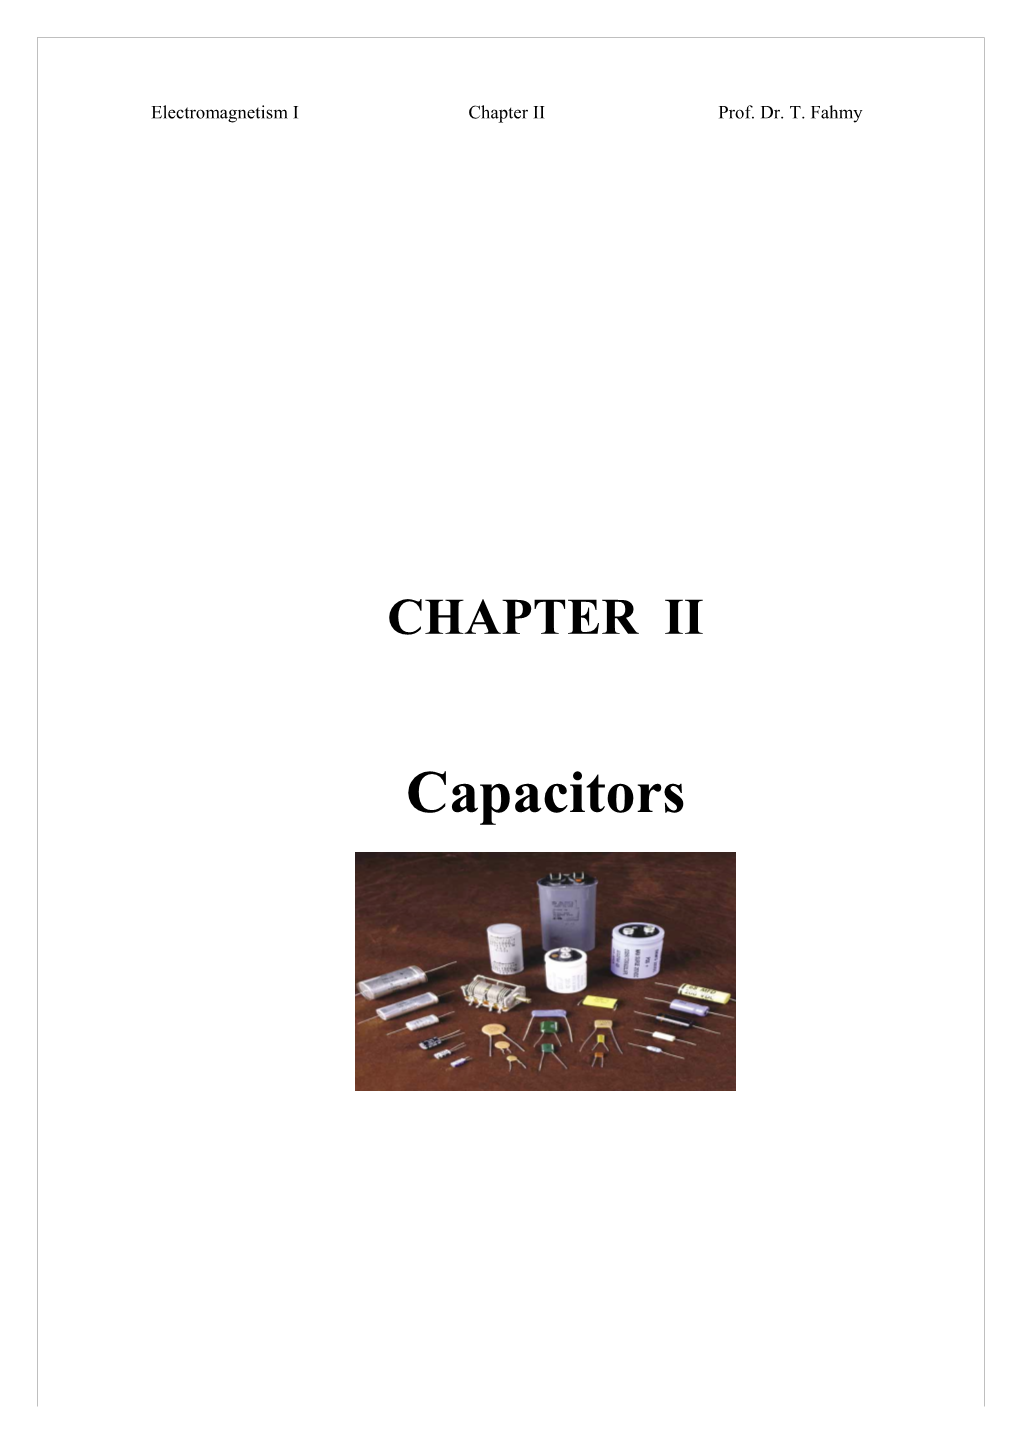 Connection of Capacitors